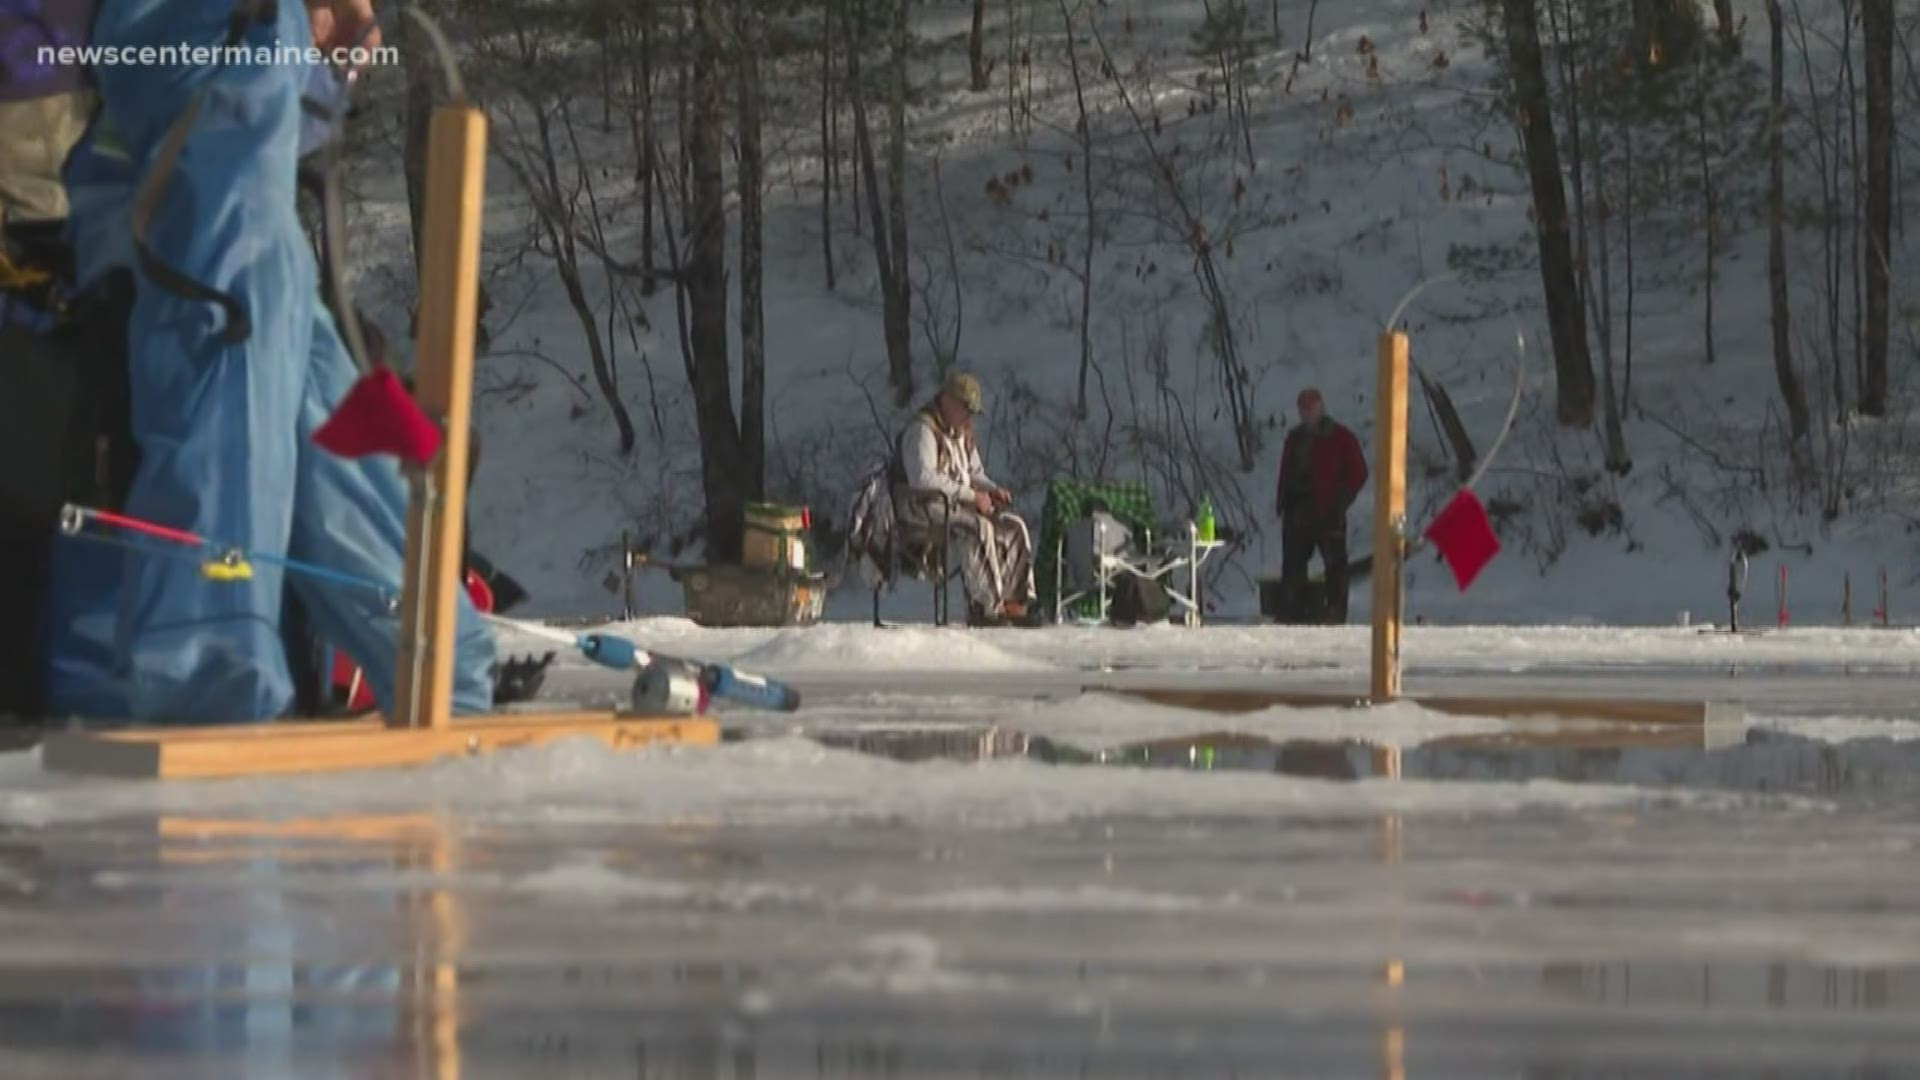 A Maine Game Warden hosts a free ice fishing event to get veterans out of the house and interacting with each other.